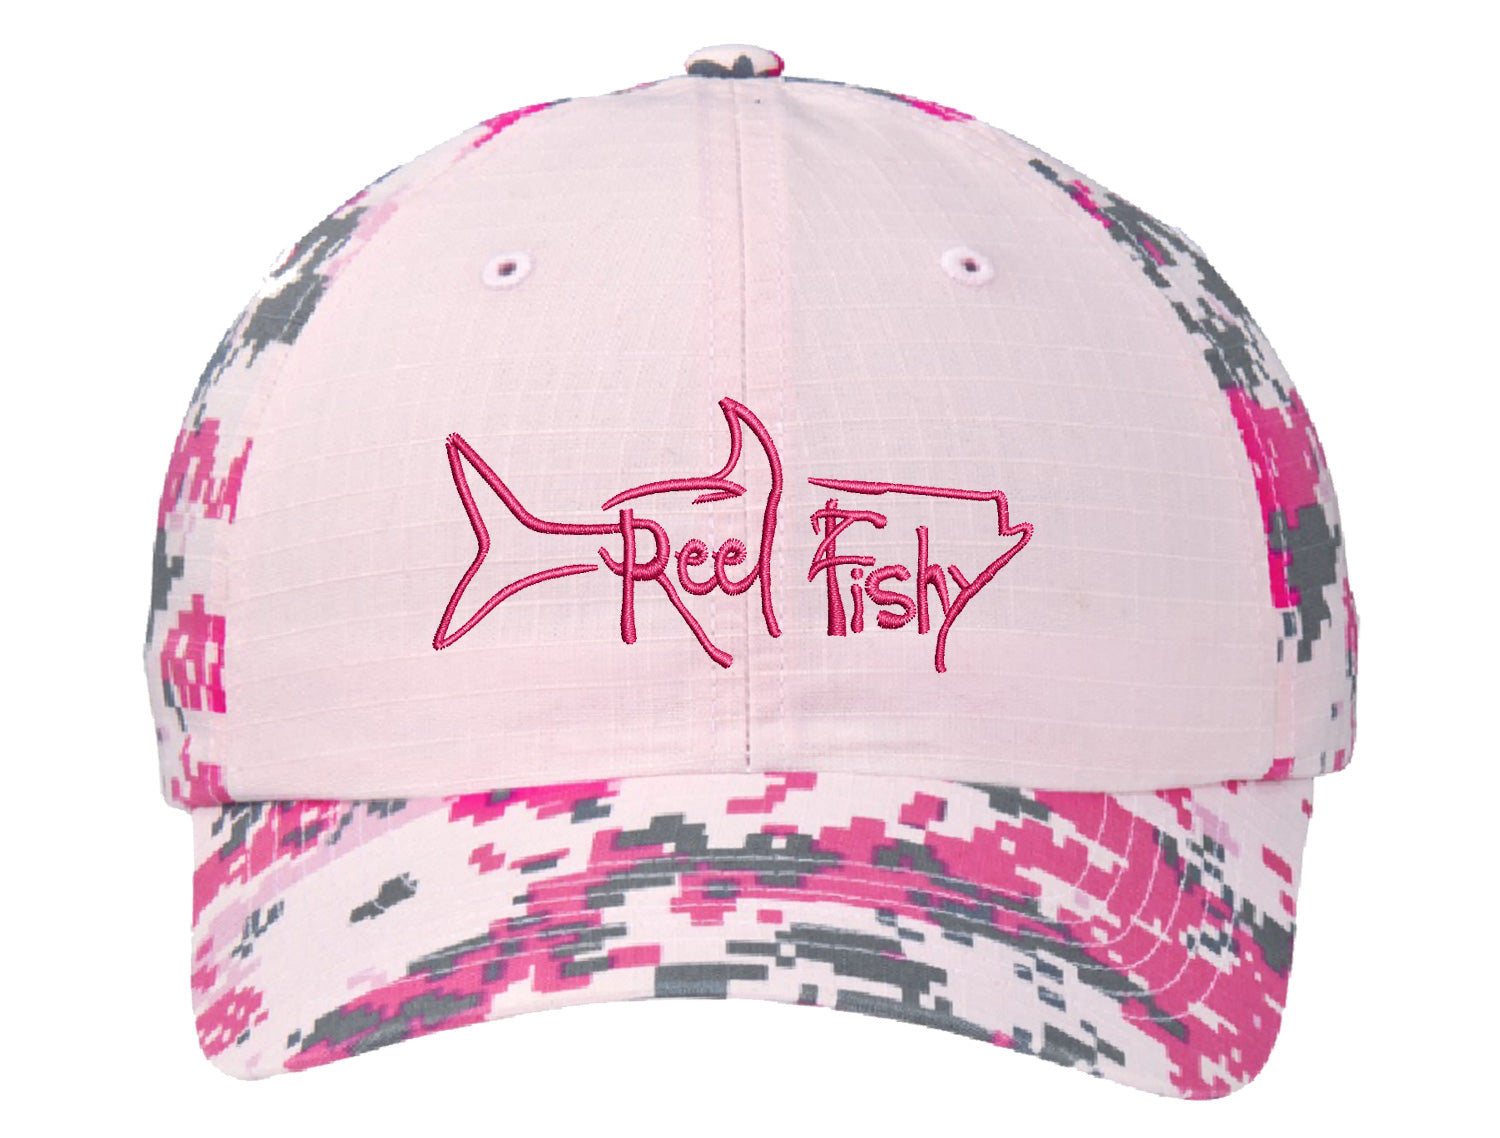 DELPH FISHING CAMO EMBROIDERED SNAPBACK HAT – Delphfishing